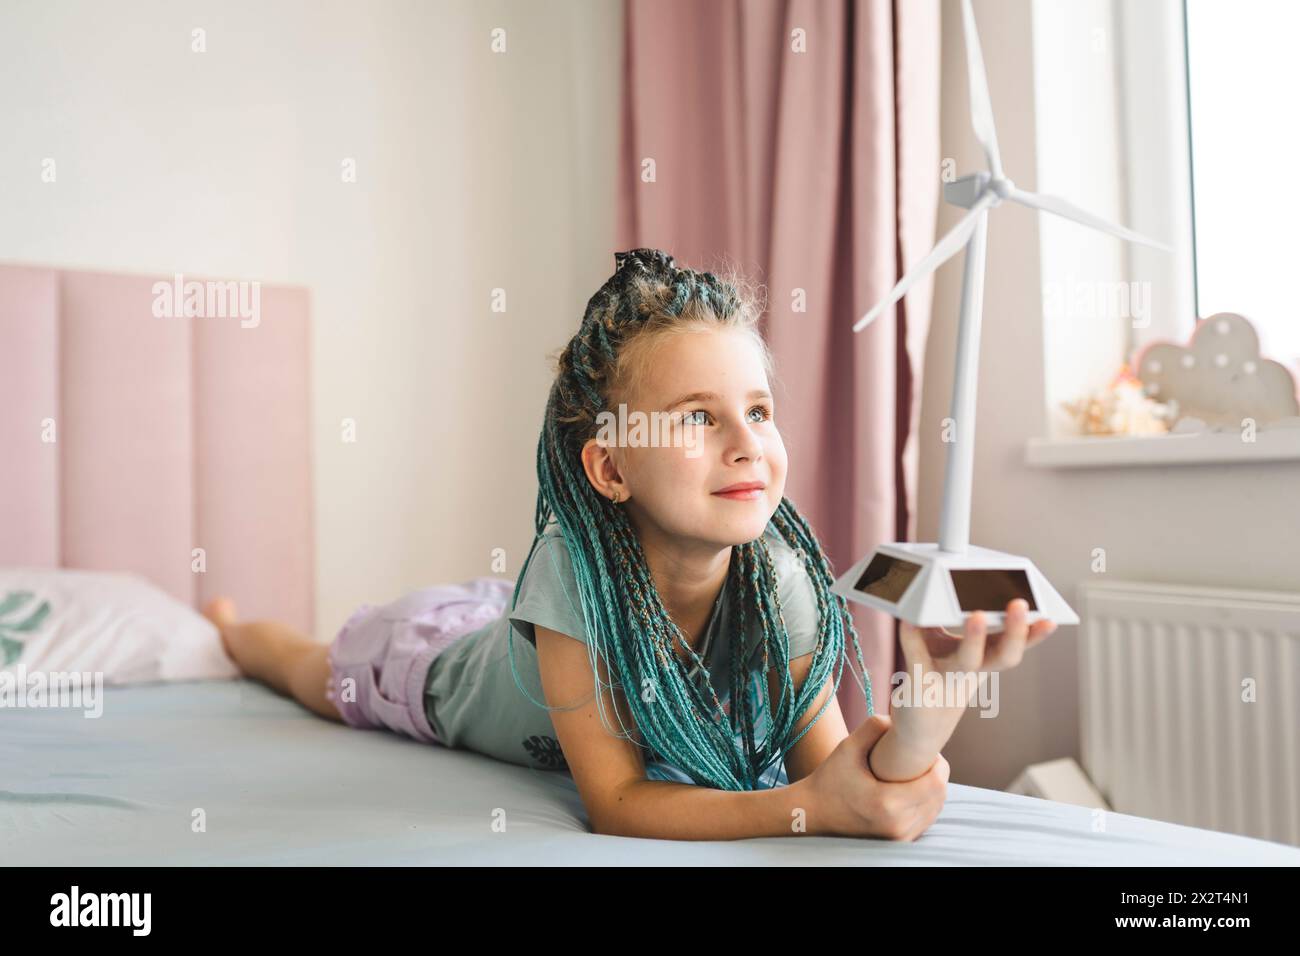 Smiling girl with dyed braided hair holding wind turbine model lying on bed at home Stock Photo